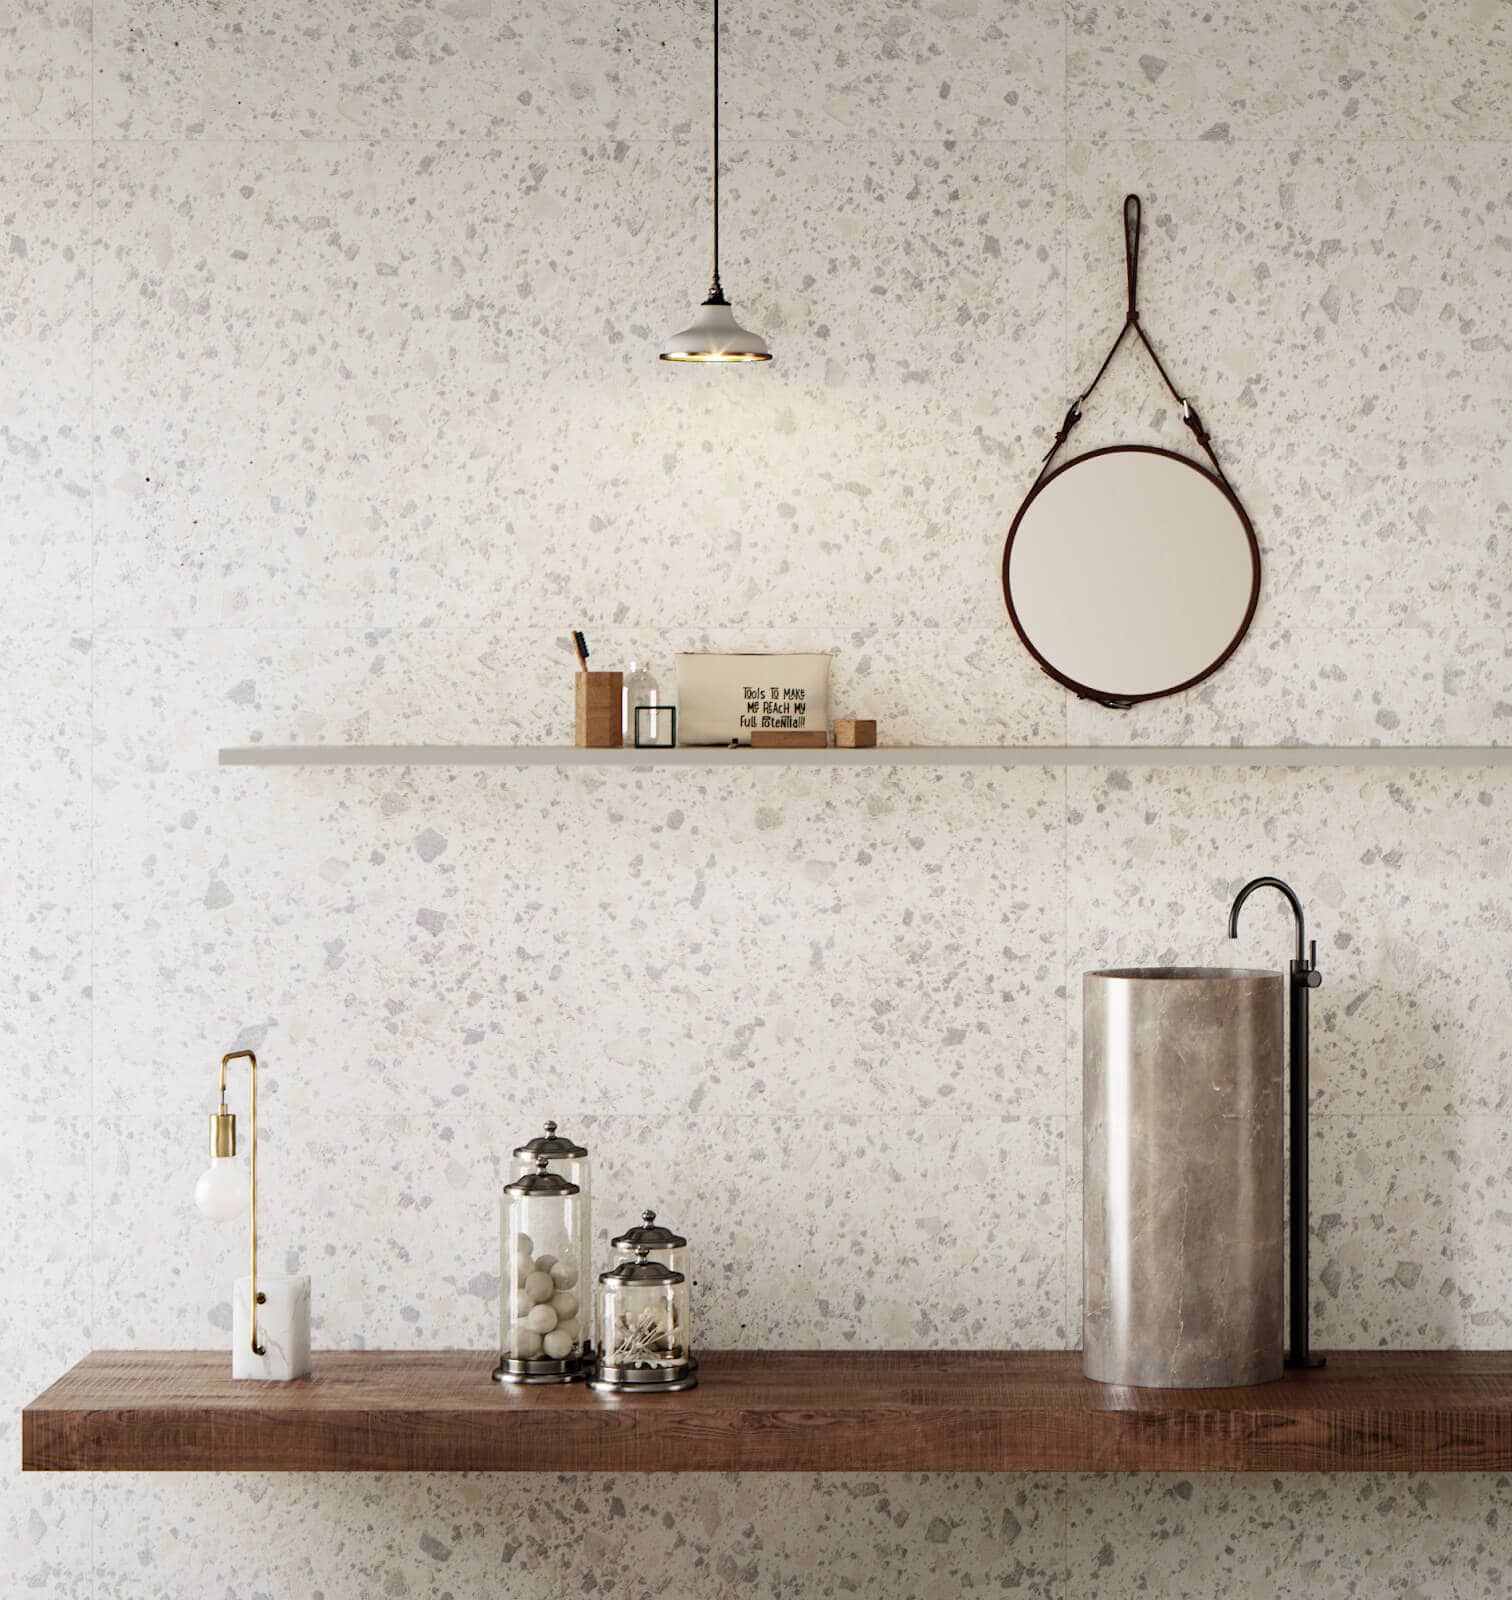 Wall with terrazzo-look tile in white 

